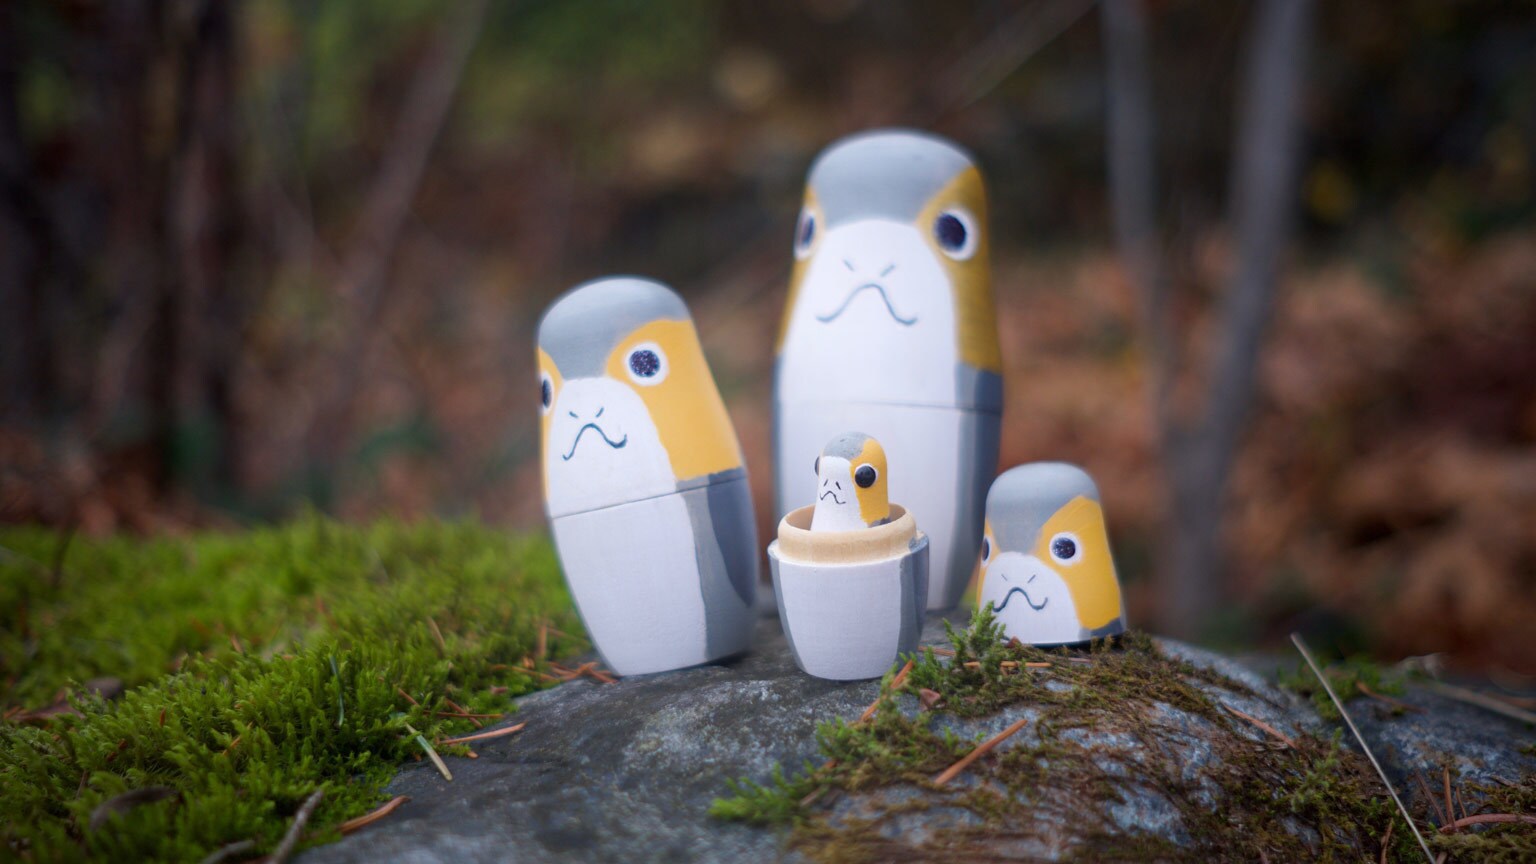 It's Time for the Jedi...to Make These DIY Porg Nesting Dolls